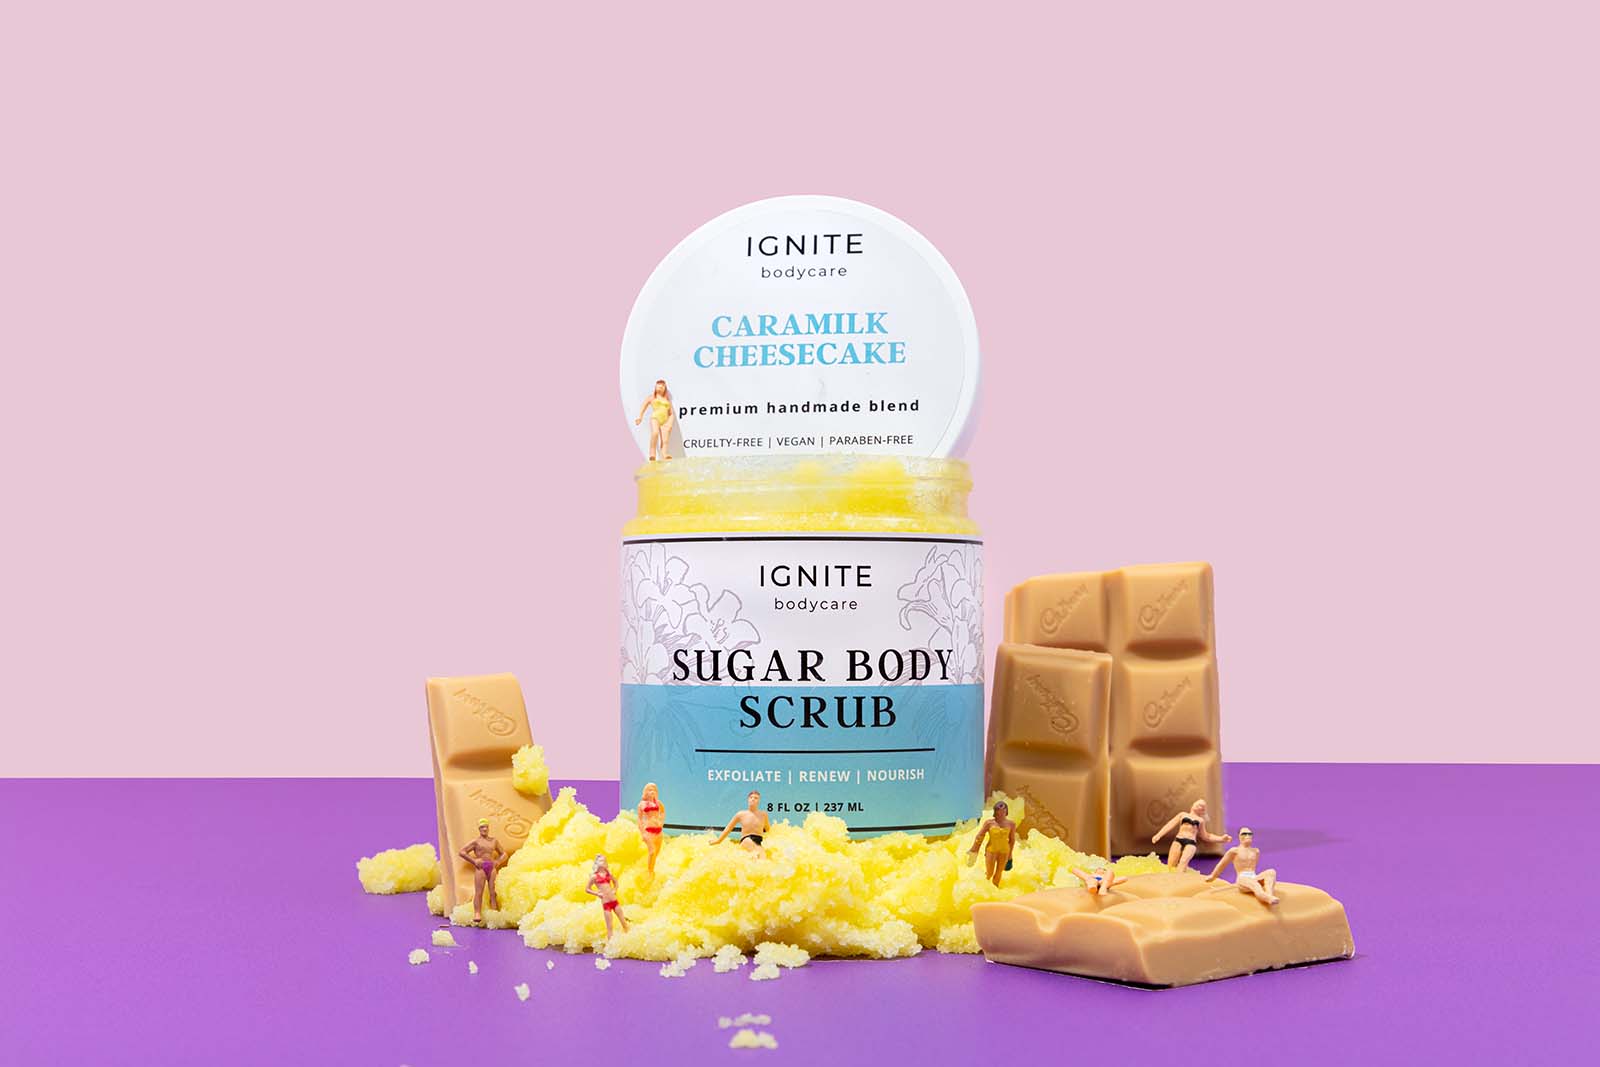 colourful aesthetic product photography for skincare brand ignite bodycare. Product Photography by Colourpop Stuido